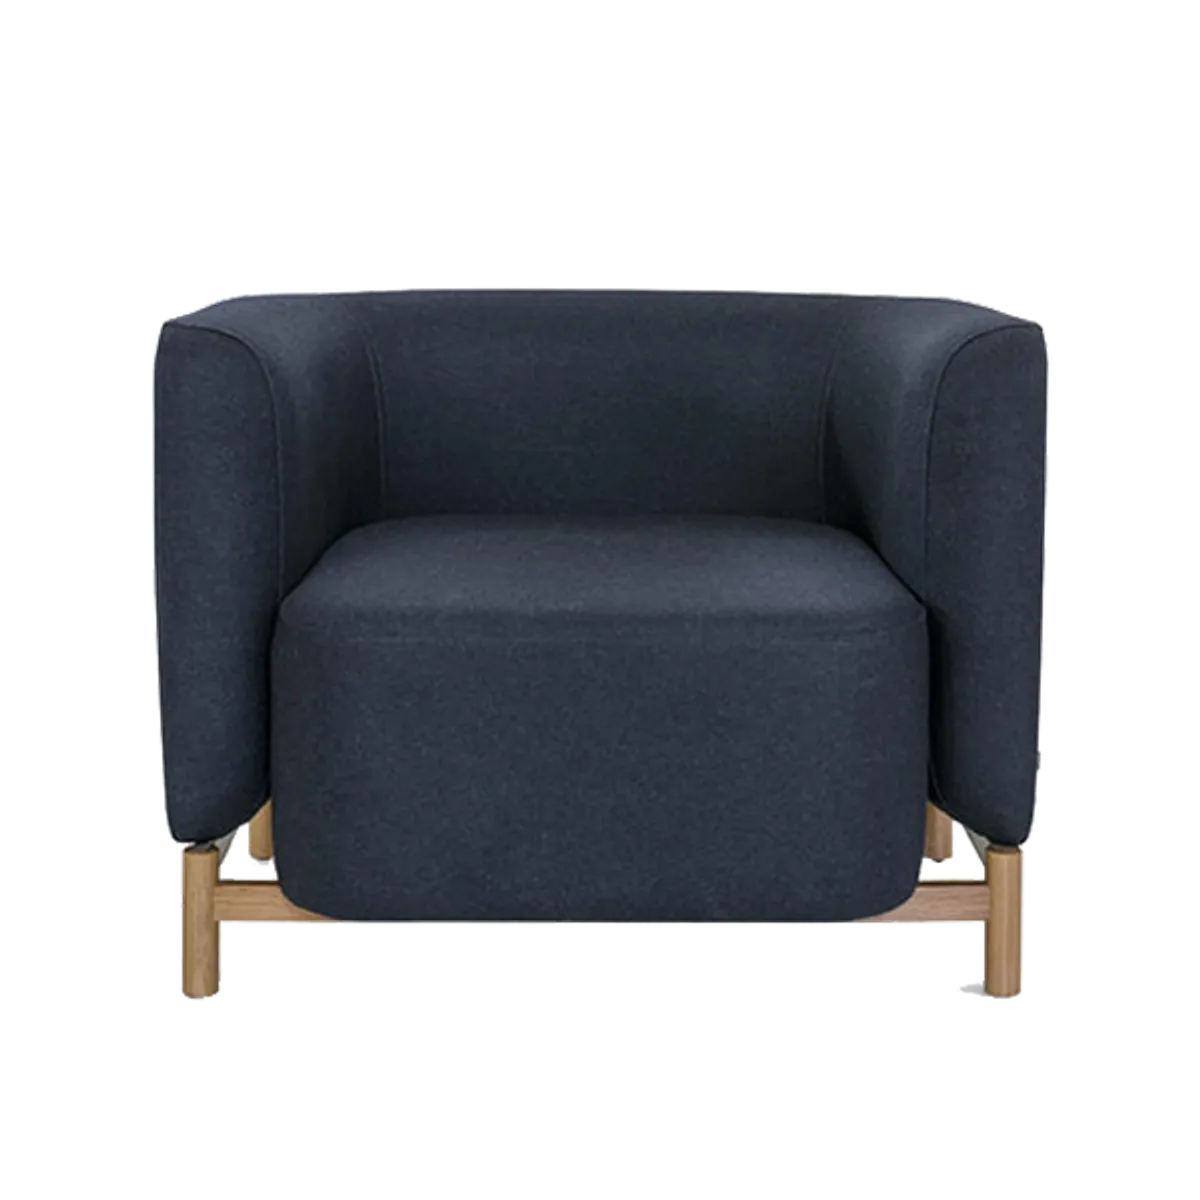 Web Roberta Lounge Chair Upholstered Hotel Furniture With Wooden Legs Insideoutcontracts 020